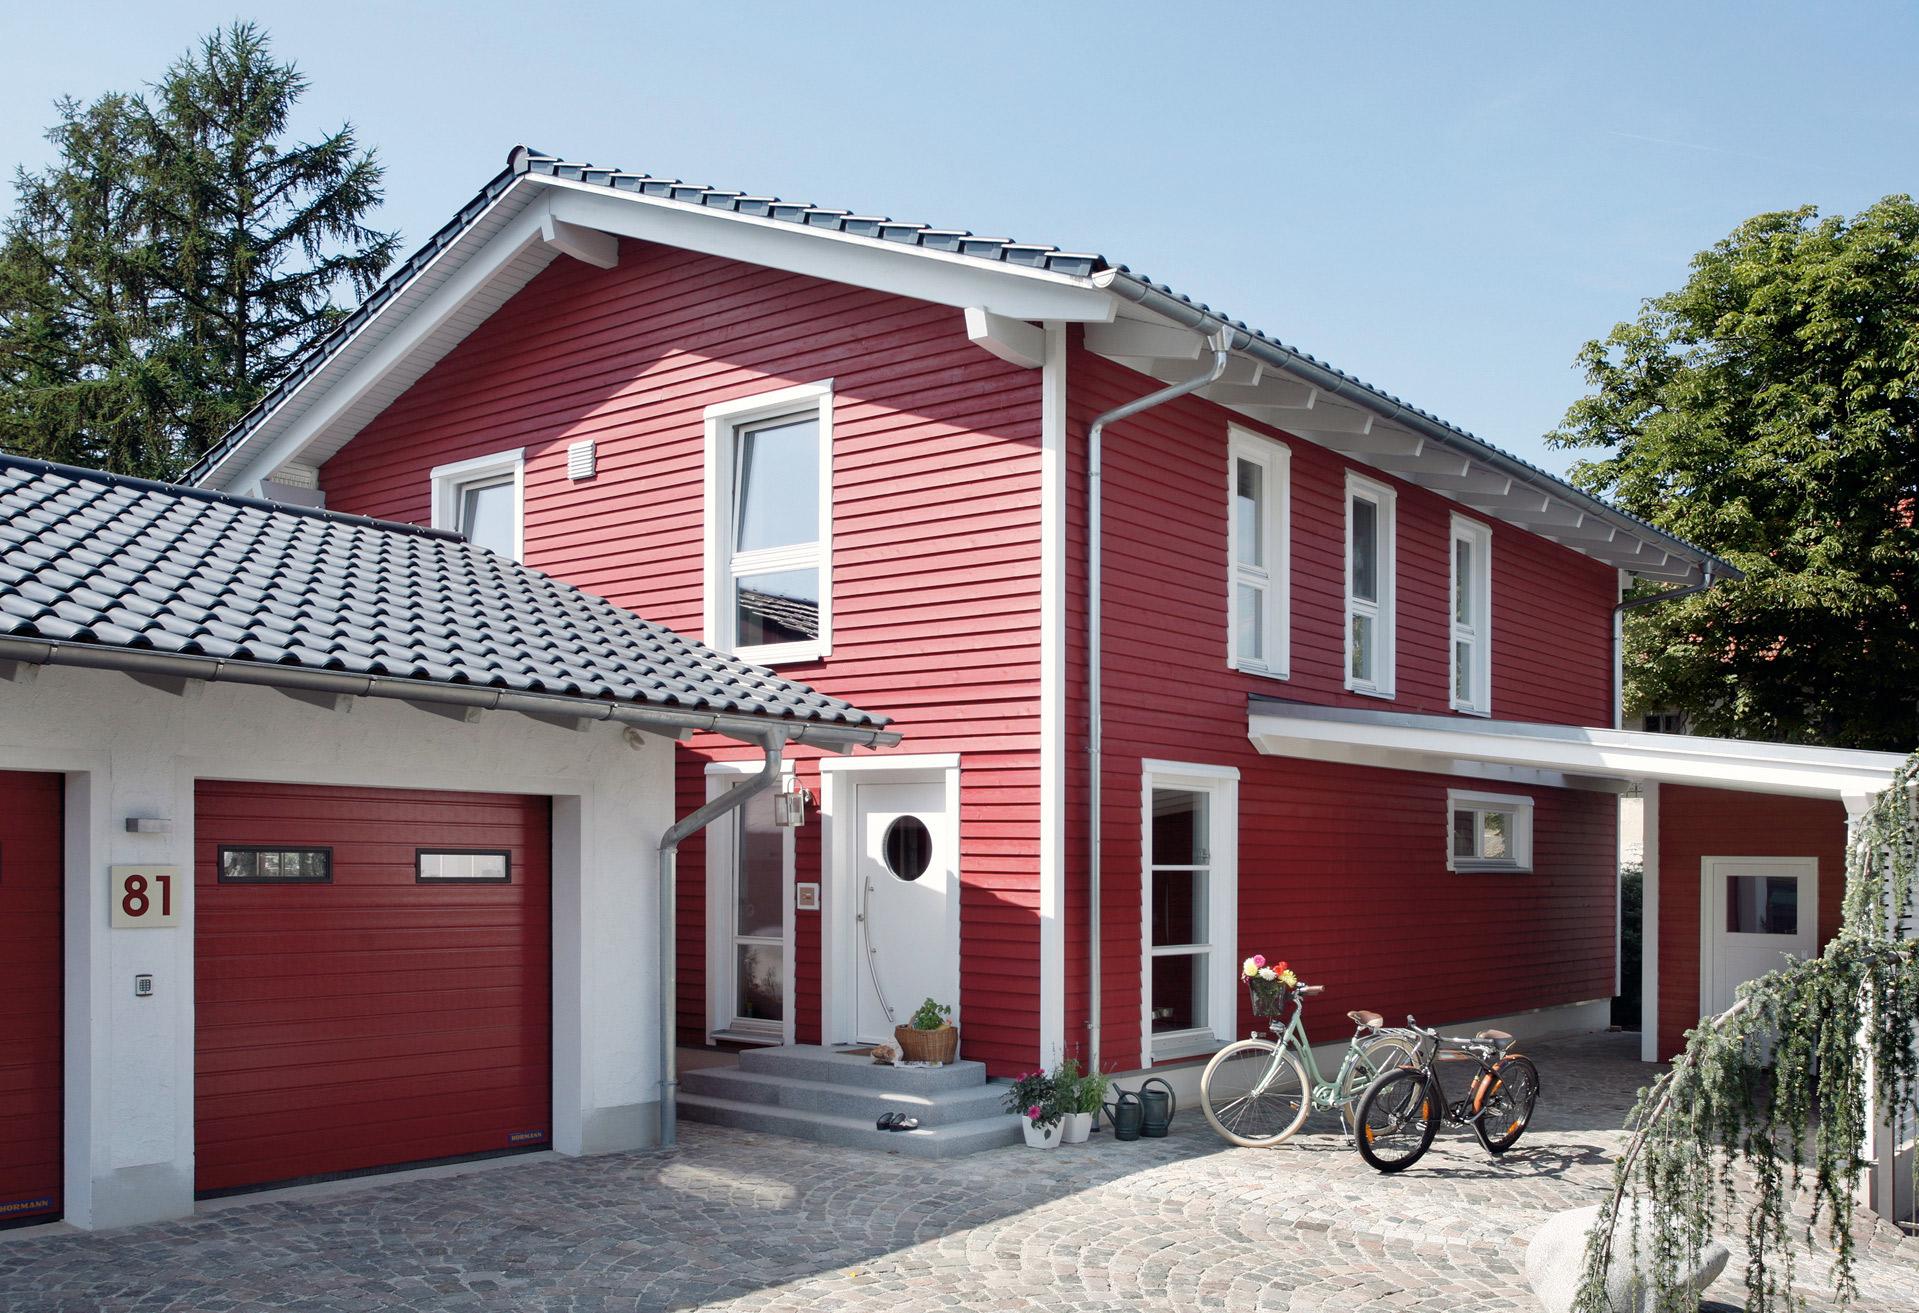 Prefabricated house with red wooden facade and double garage